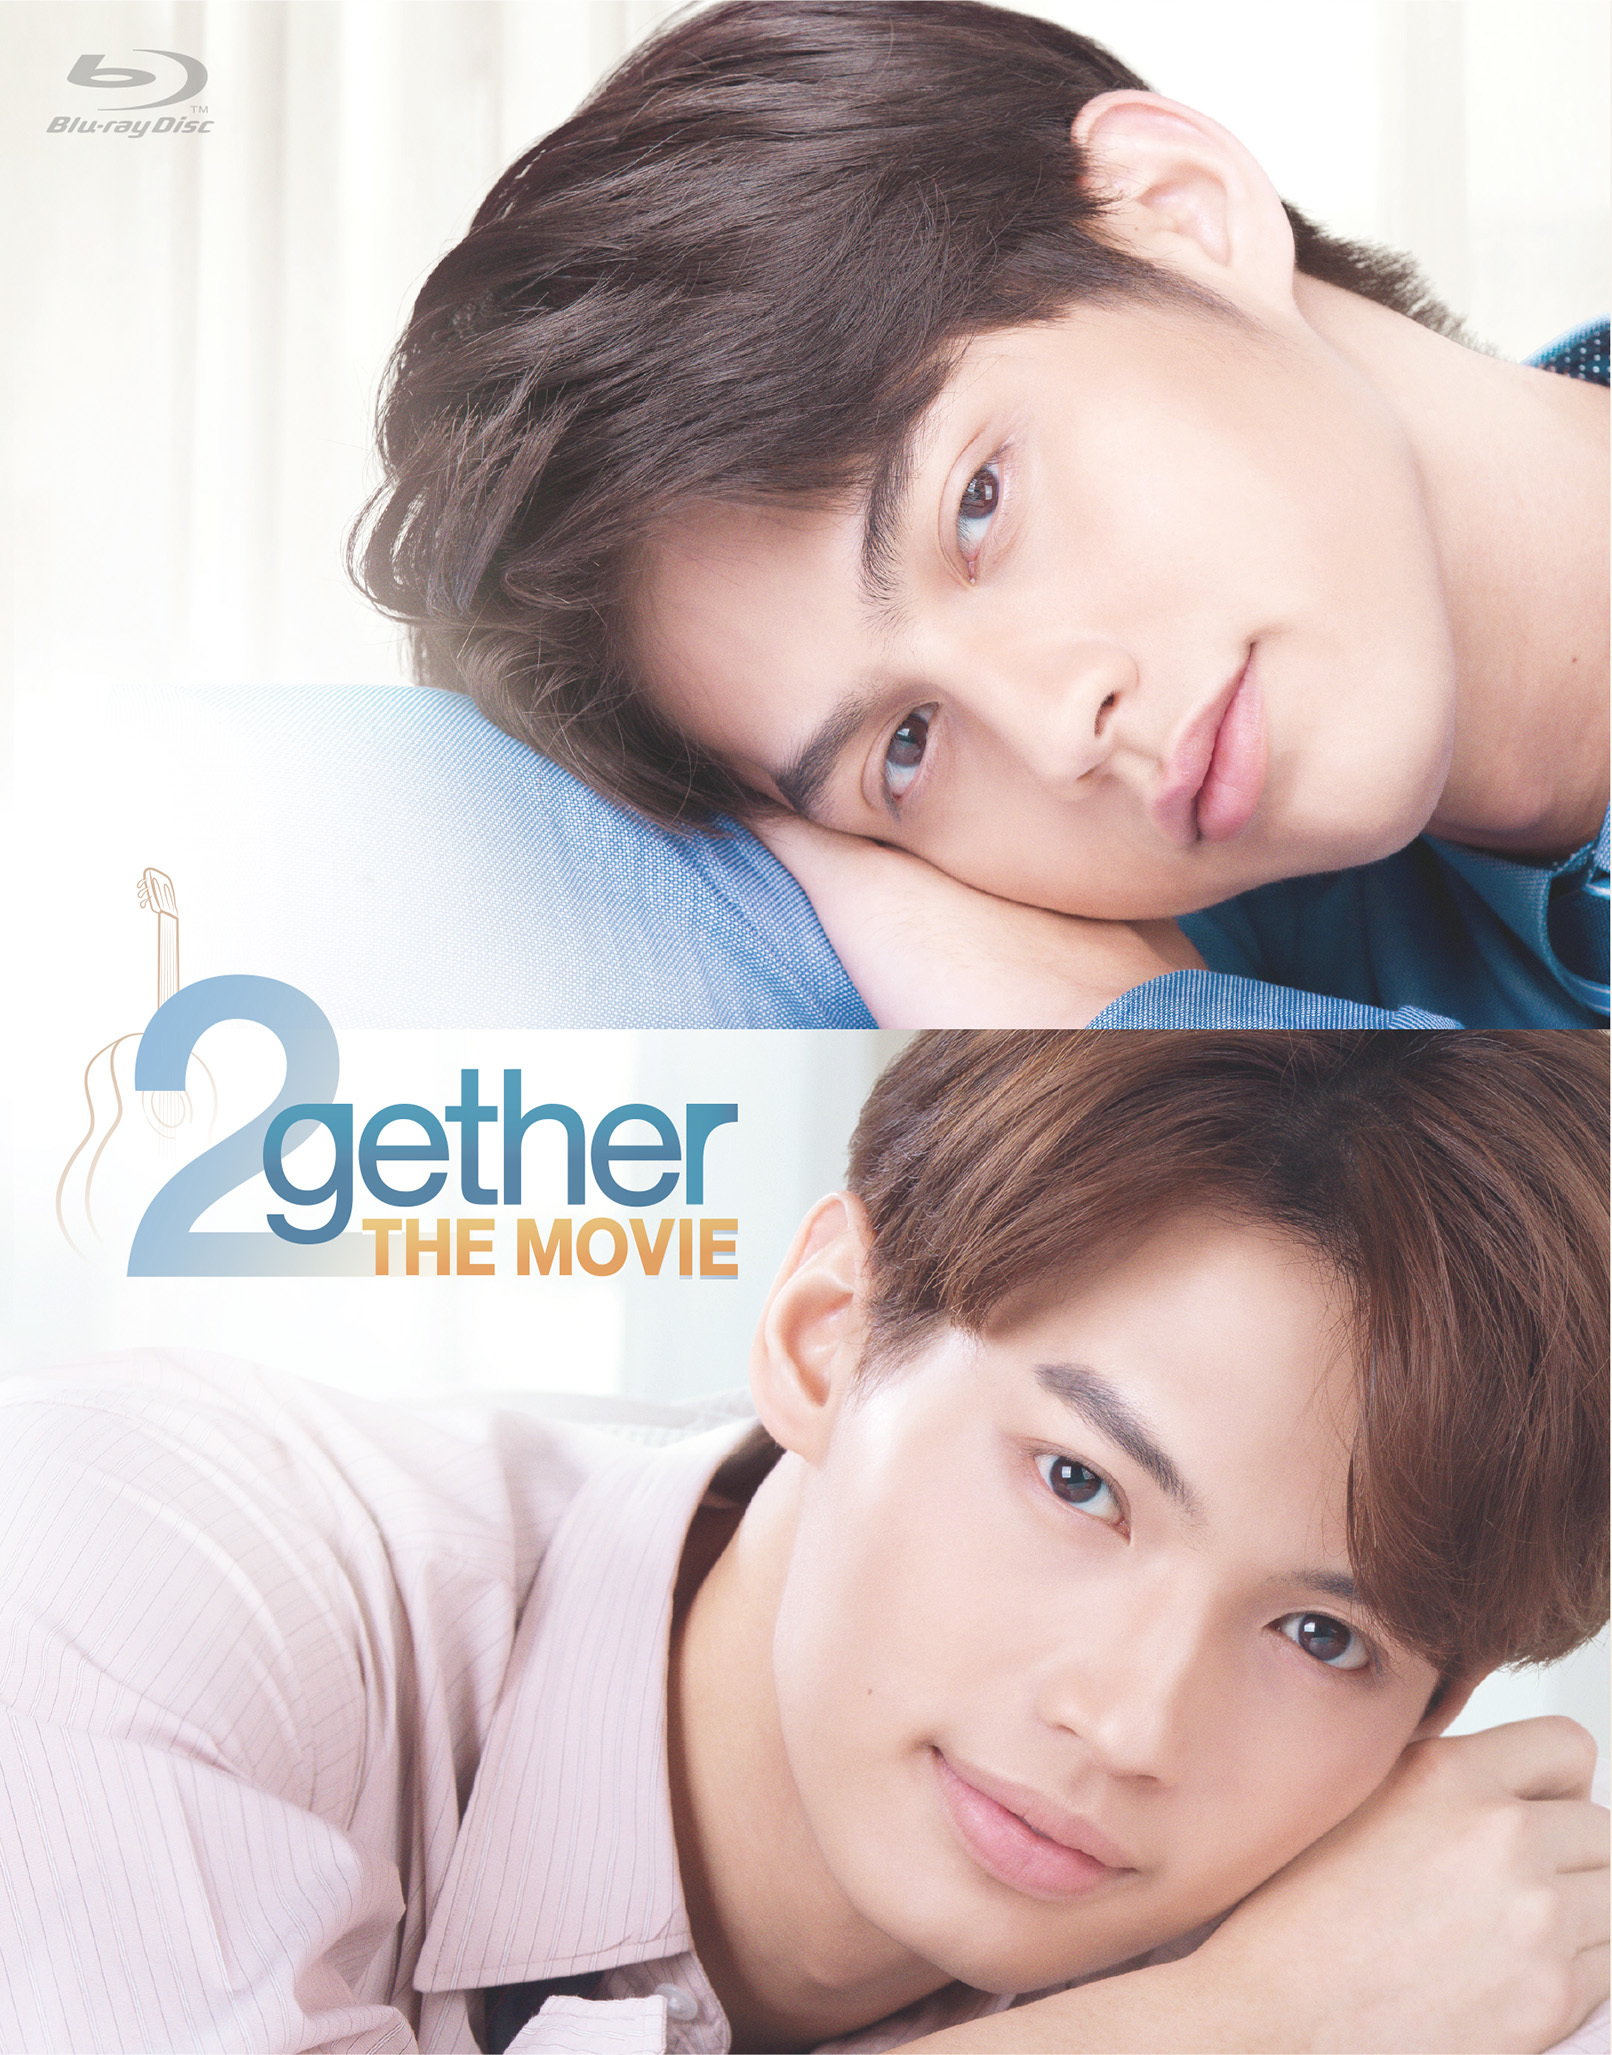 『2gether THE MOVIE』